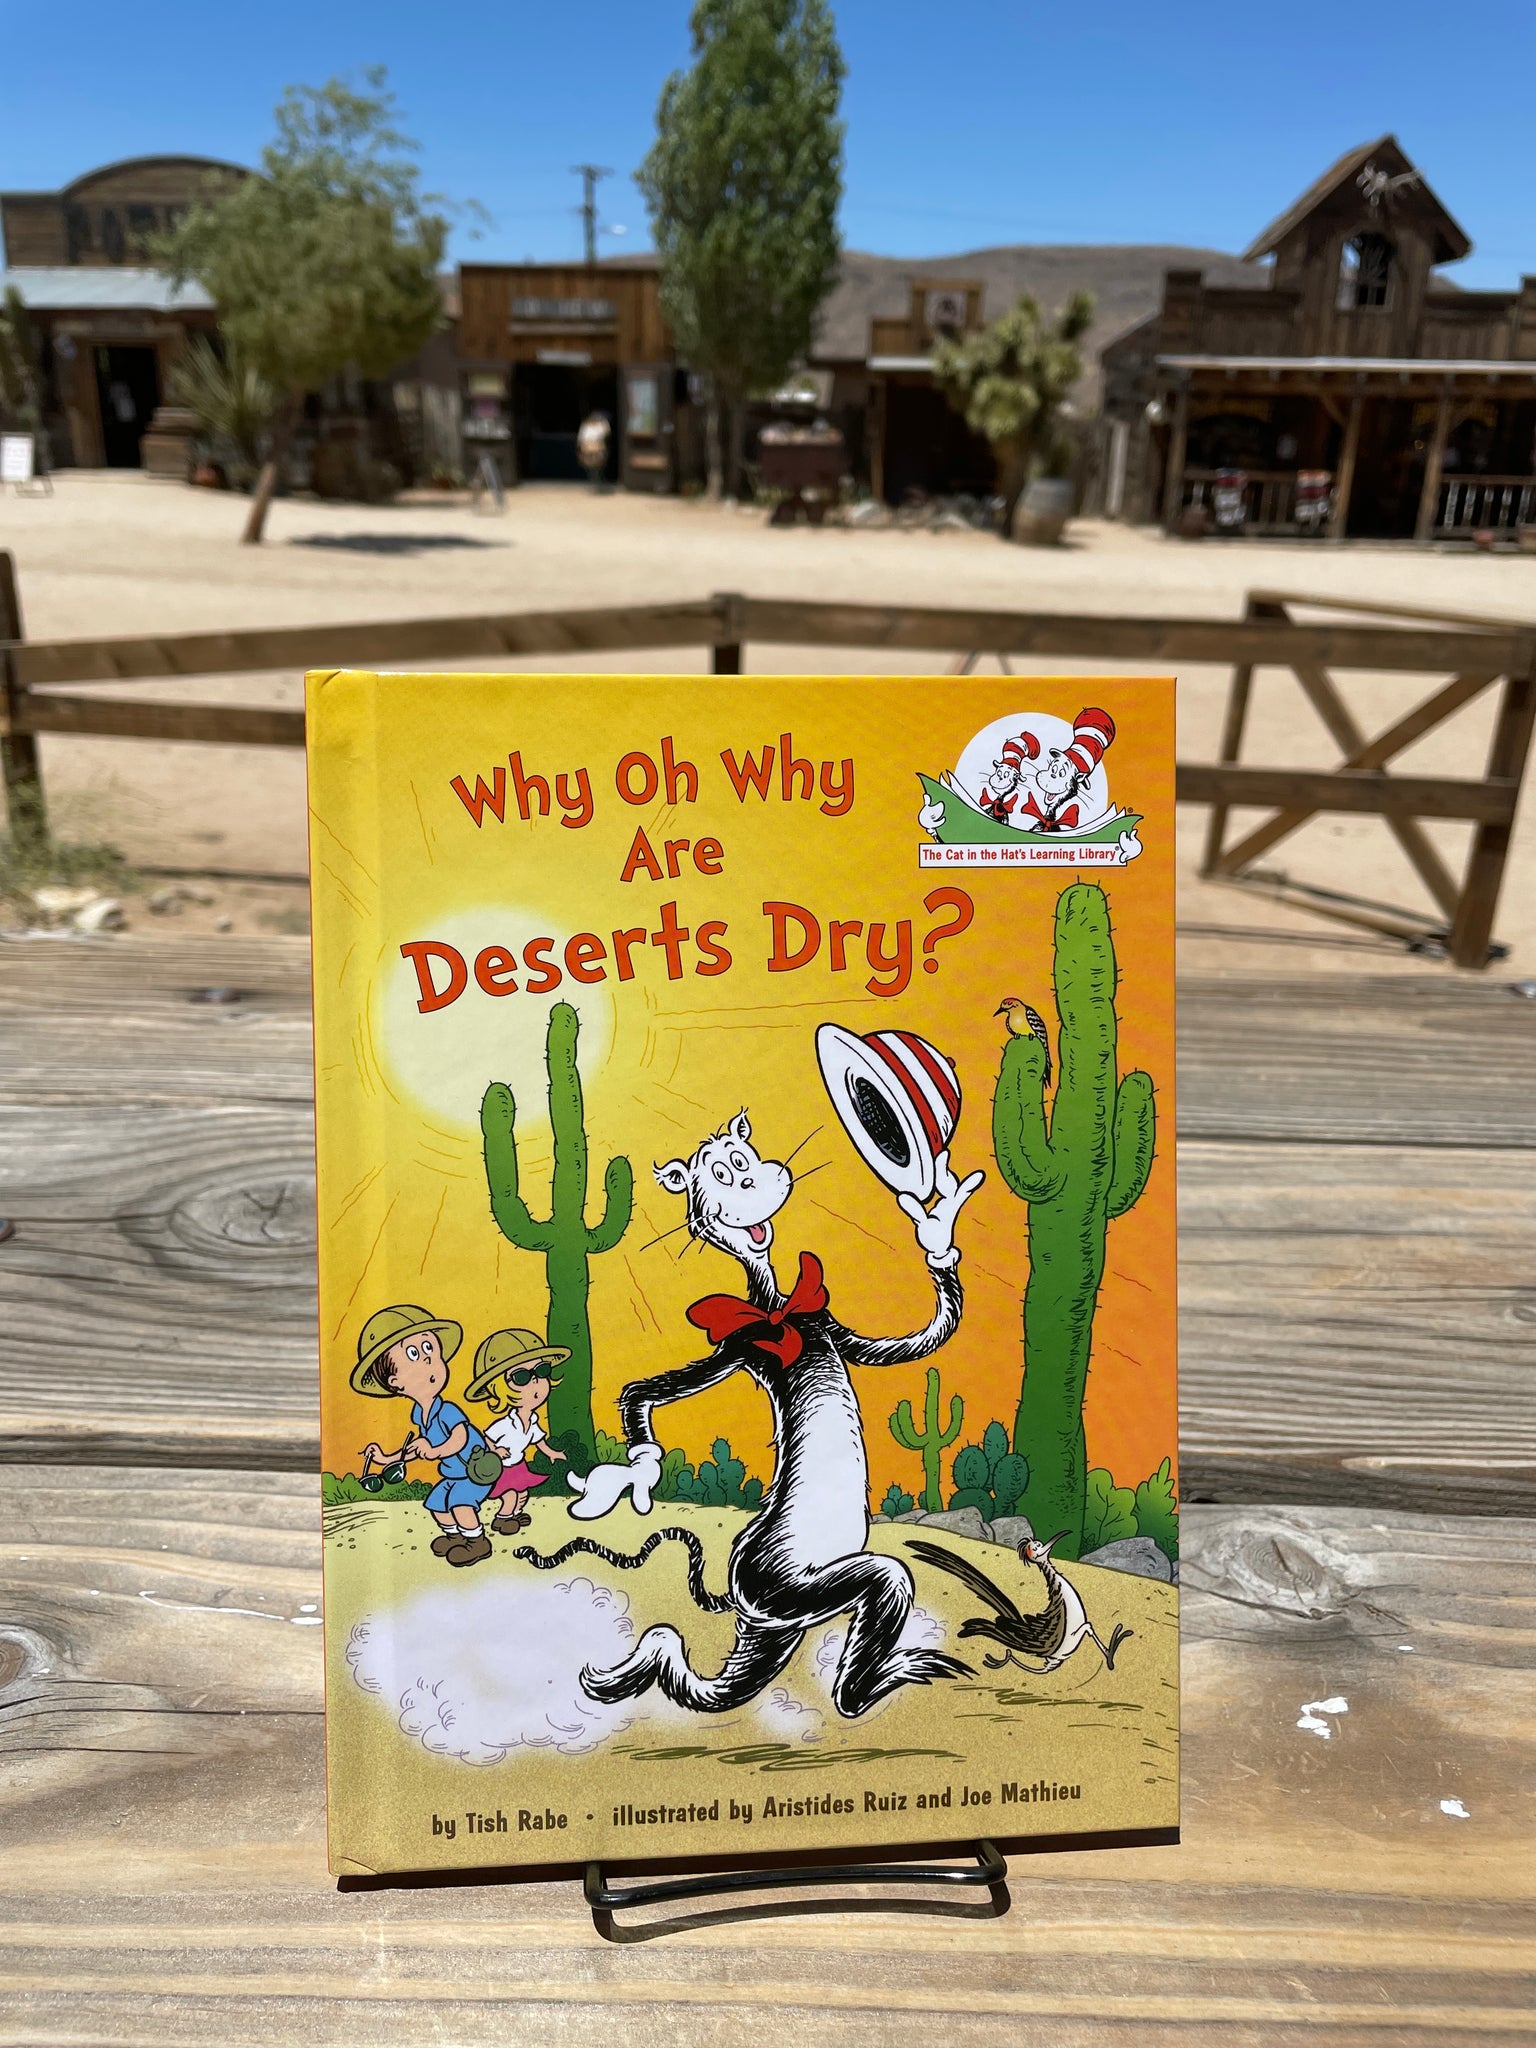 Why Oh Why are the Deserts Dry? Childrens book